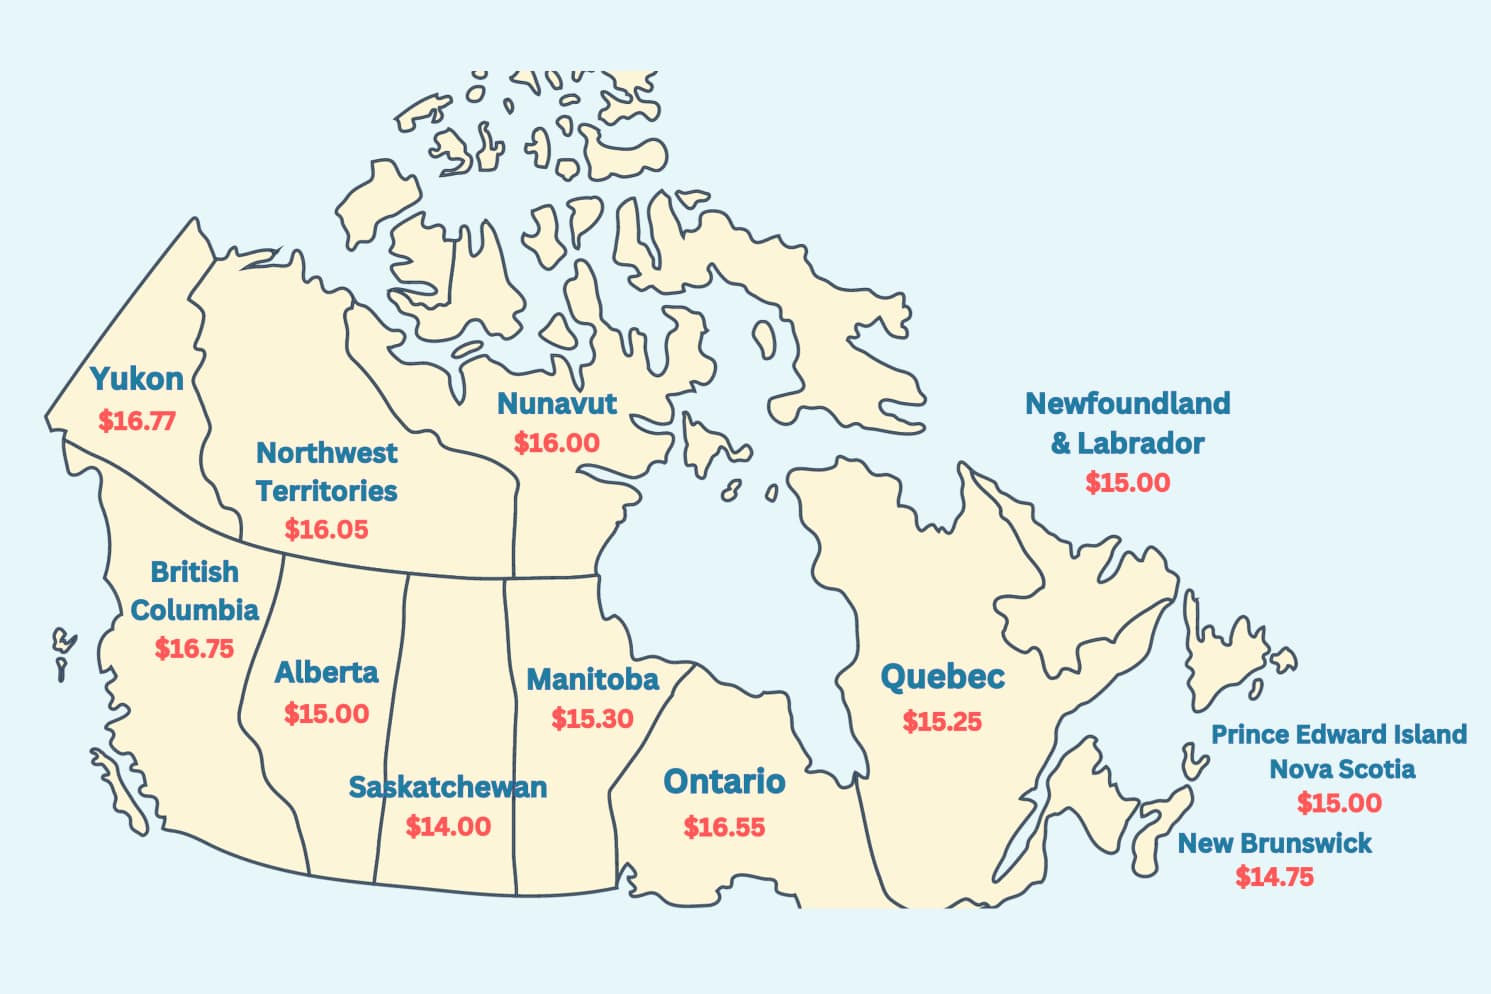 Map of Canada showing the hourly minimum wage in each province